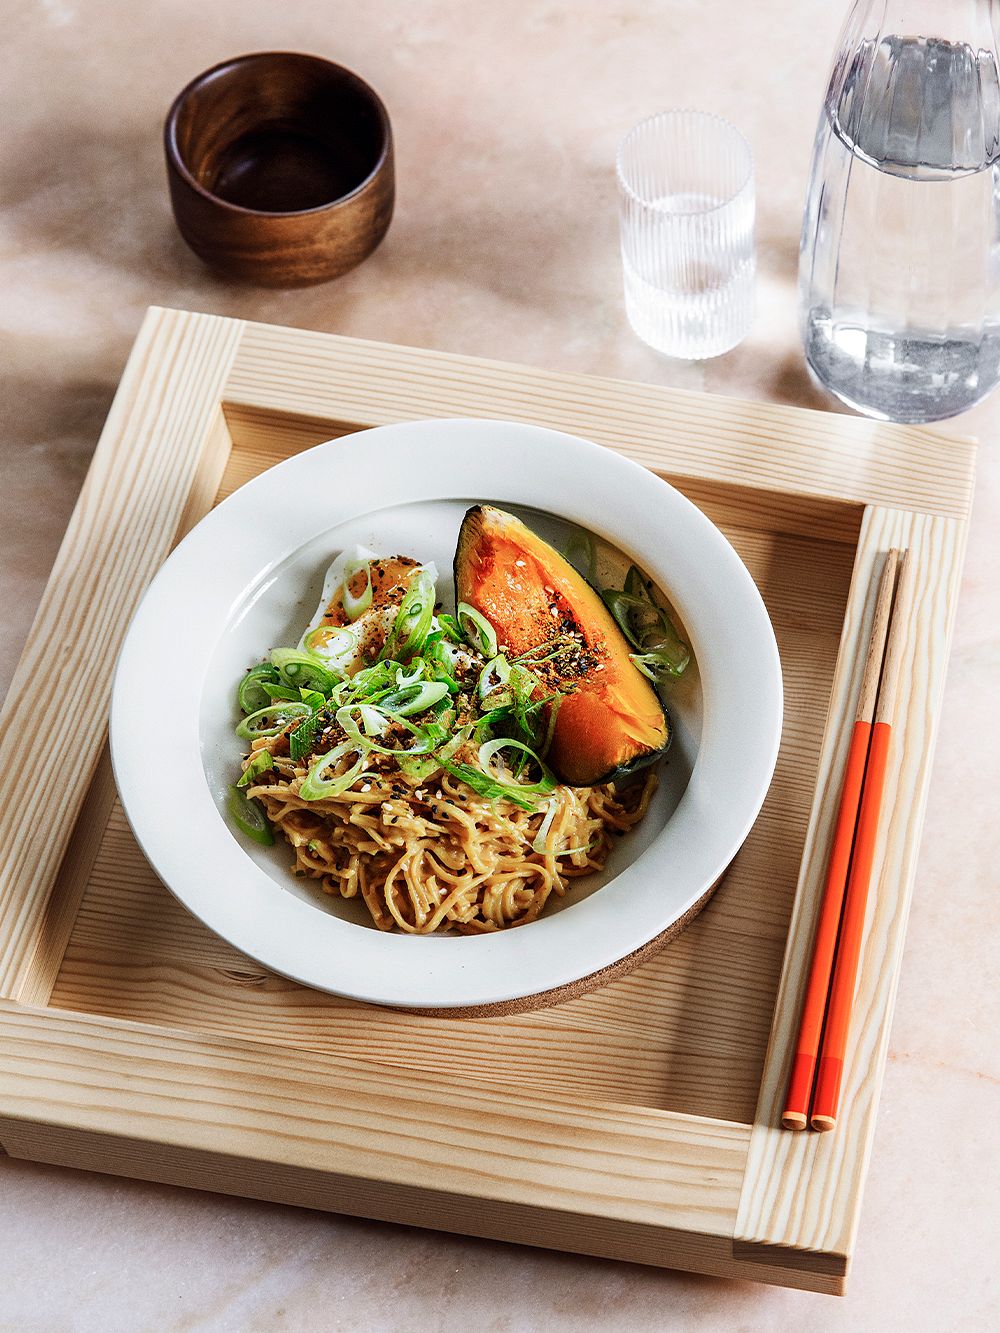 Miso noodles and roasted pumpkin on Iwatemo KO plate and Vaarnii 010 pine tray